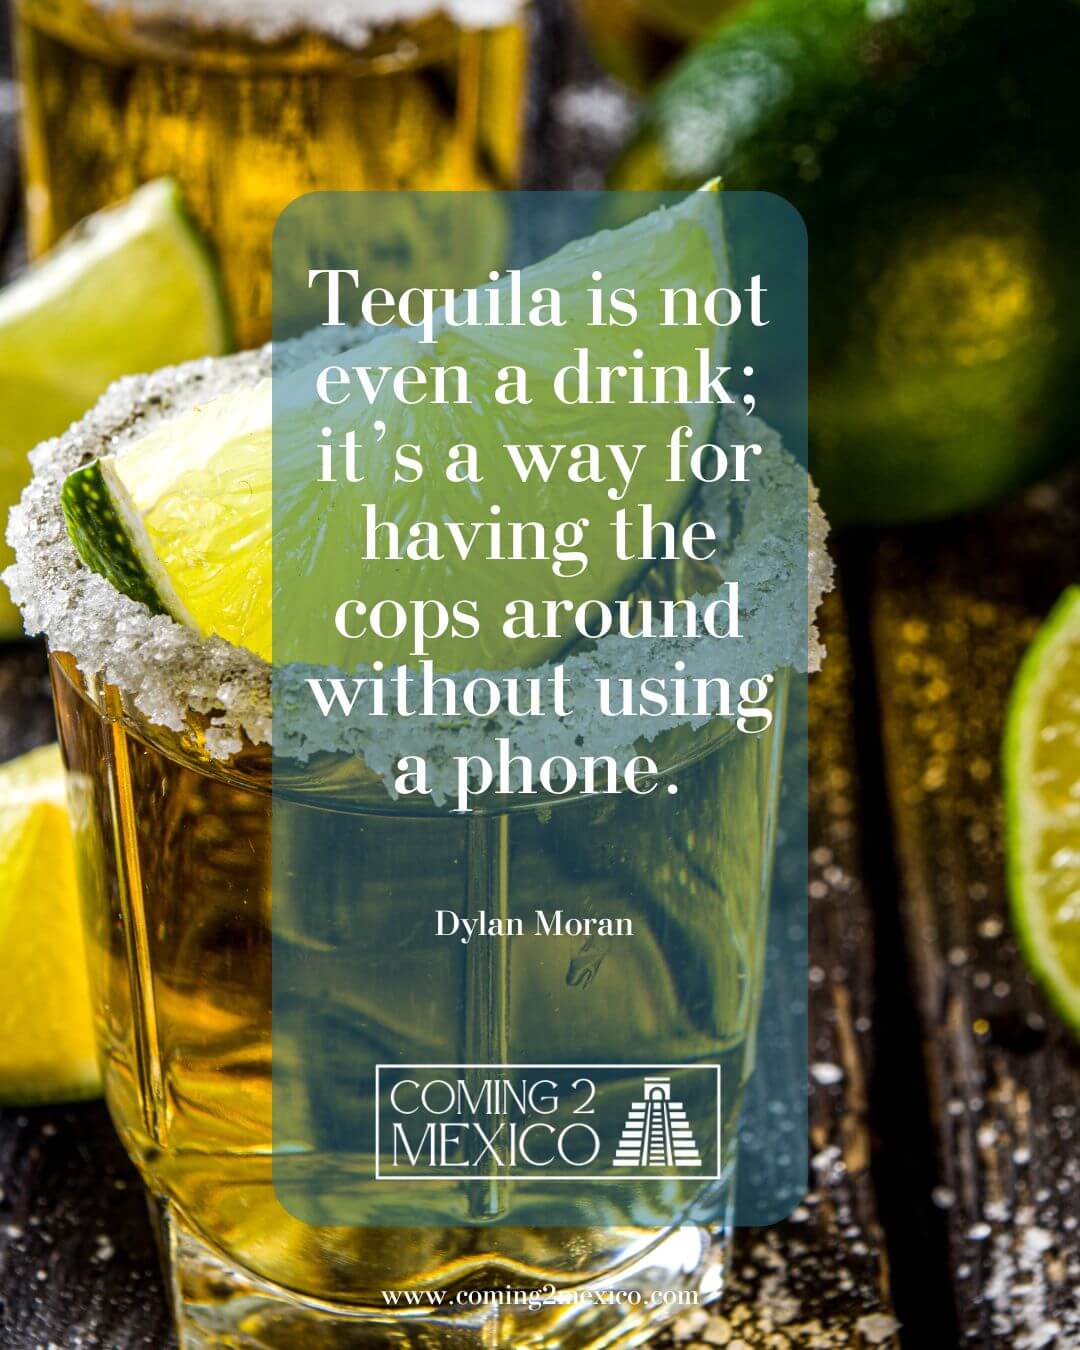 “Tequila is not even a drink; it’s a way for having the cops around without using a phone.” - Dylan Moran